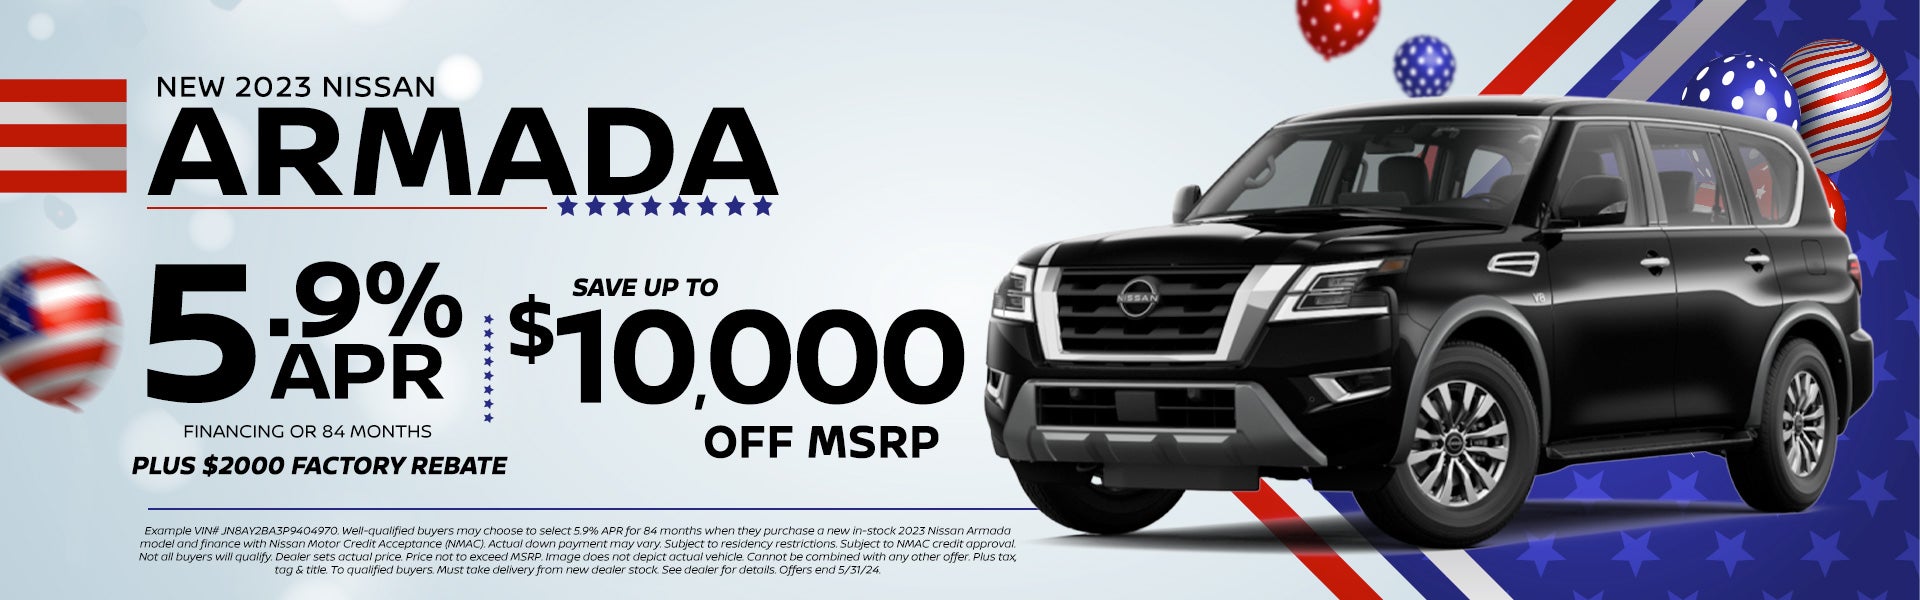 2023 Nissan Armada $10,000 off MSRP! 5.9% 84 Months with $20